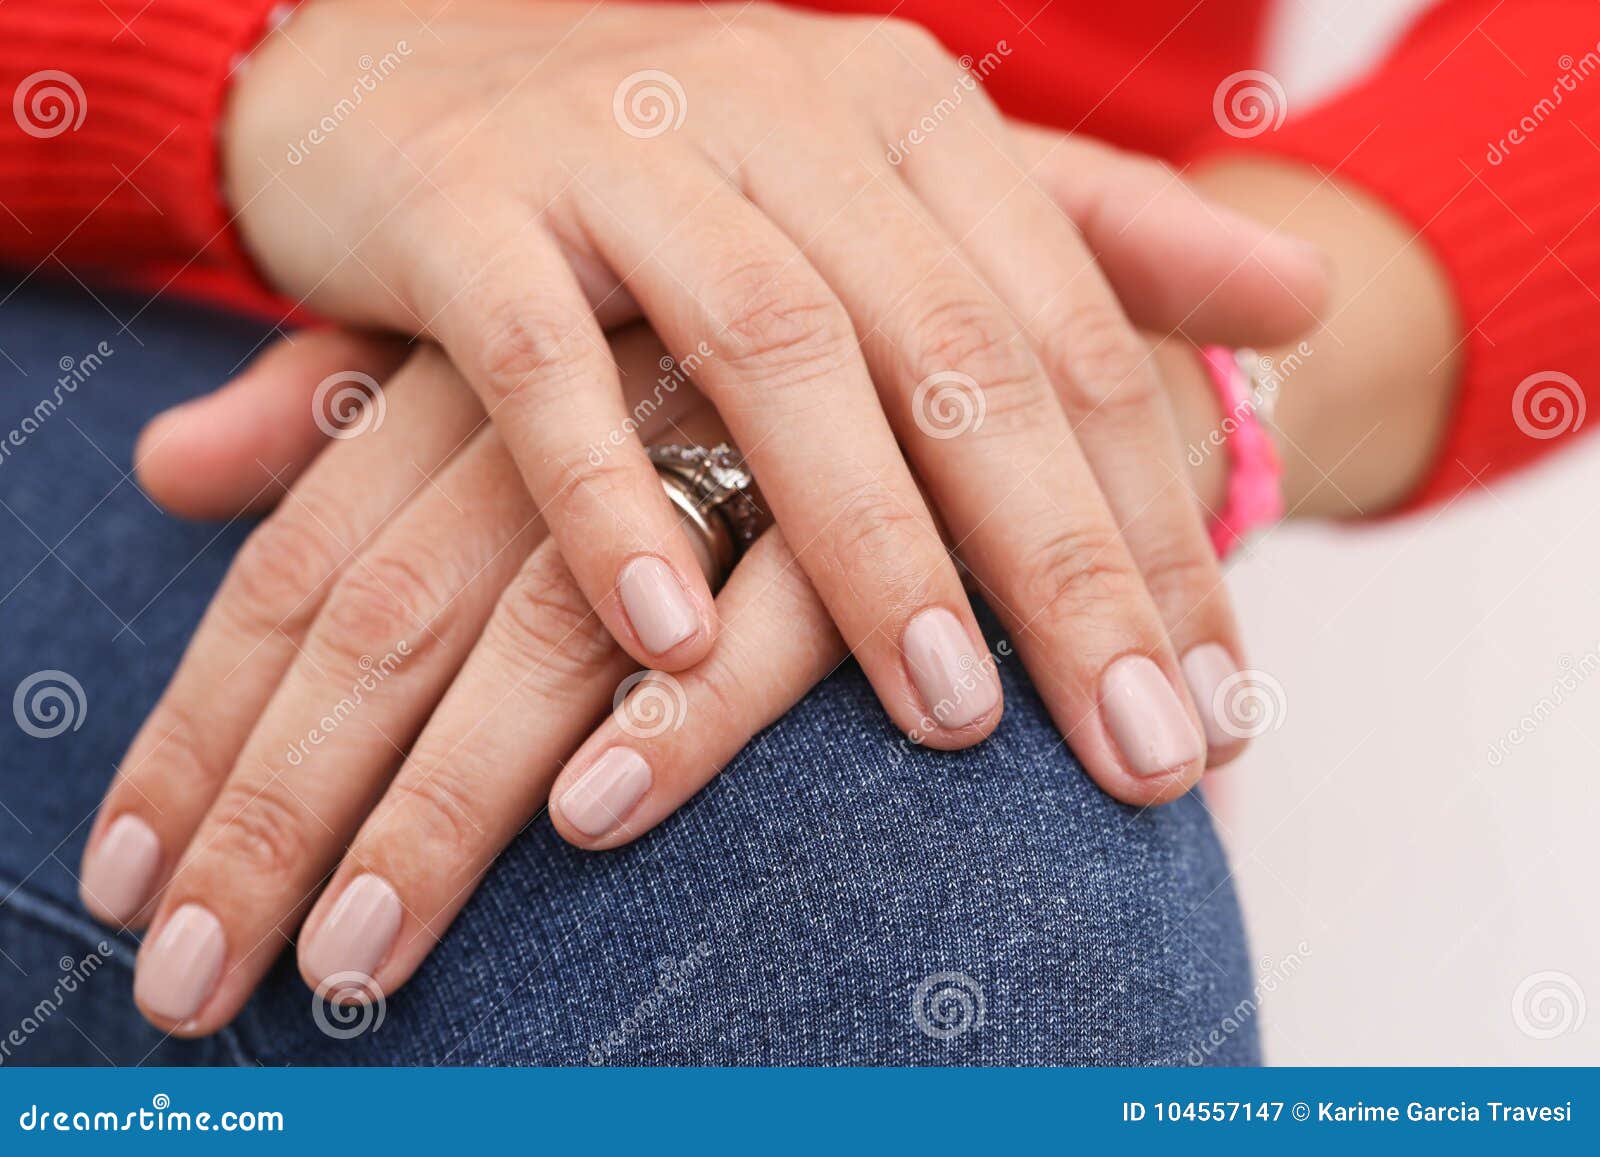 beautiful nails work and manicure